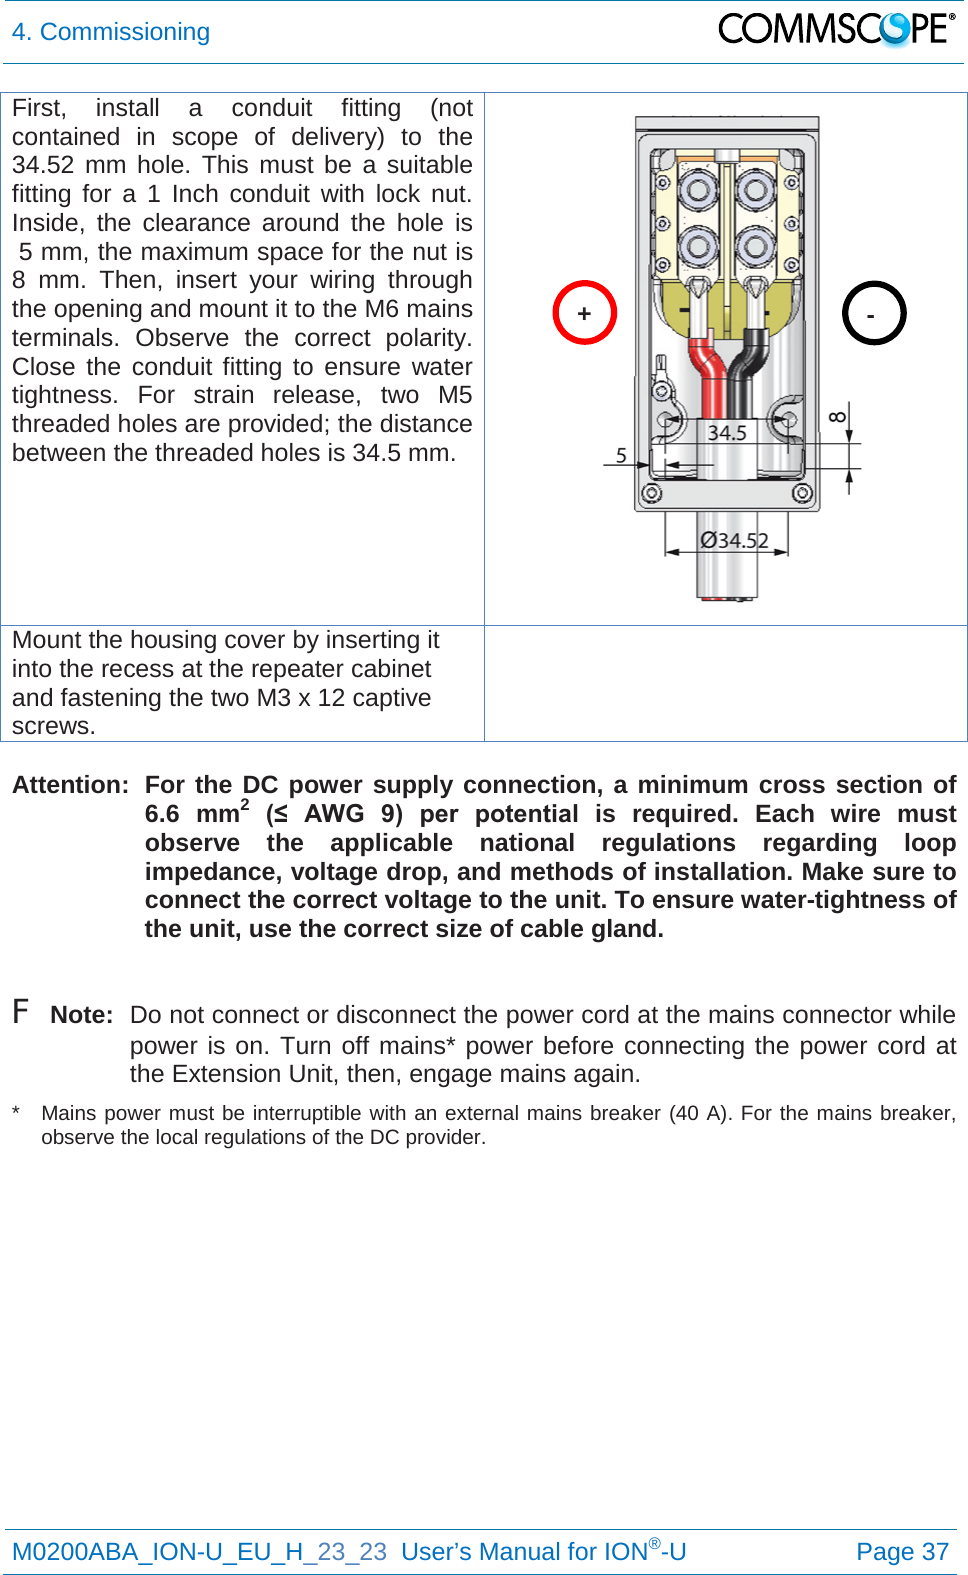 4. Commissioning   M0200ABA_ION-U_EU_H_23_23  User’s Manual for ION®-U  Page 37  First, install a conduit fitting (not contained in scope of delivery) to the 34.52 mm hole. This must be a suitable fitting for a 1 Inch conduit with lock nut.  Inside, the clearance around the hole is  5 mm, the maximum space for the nut is 8 mm. Then, insert your wiring through the opening and mount it to the M6 mains terminals. Observe the correct polarity. Close the conduit fitting to ensure water tightness. For strain release, two M5 threaded holes are provided; the distance between the threaded holes is 34.5 mm.  Mount the housing cover by inserting it into the recess at the repeater cabinet and fastening the two M3 x 12 captive screws.   Attention:  For the DC power supply connection, a minimum cross section of 6.6 mm2 (≤  AWG  9)  per  potential  is required. Each wire must observe the applicable national regulations regarding loop impedance, voltage drop, and methods of installation. Make sure to connect the correct voltage to the unit. To ensure water-tightness of the unit, use the correct size of cable gland.  F Note:  Do not connect or disconnect the power cord at the mains connector while power is on. Turn off mains* power before connecting the power cord at the Extension Unit, then, engage mains again. *  Mains power must be interruptible with an external mains breaker (40 A). For the mains breaker, observe the local regulations of the DC provider.    + - 